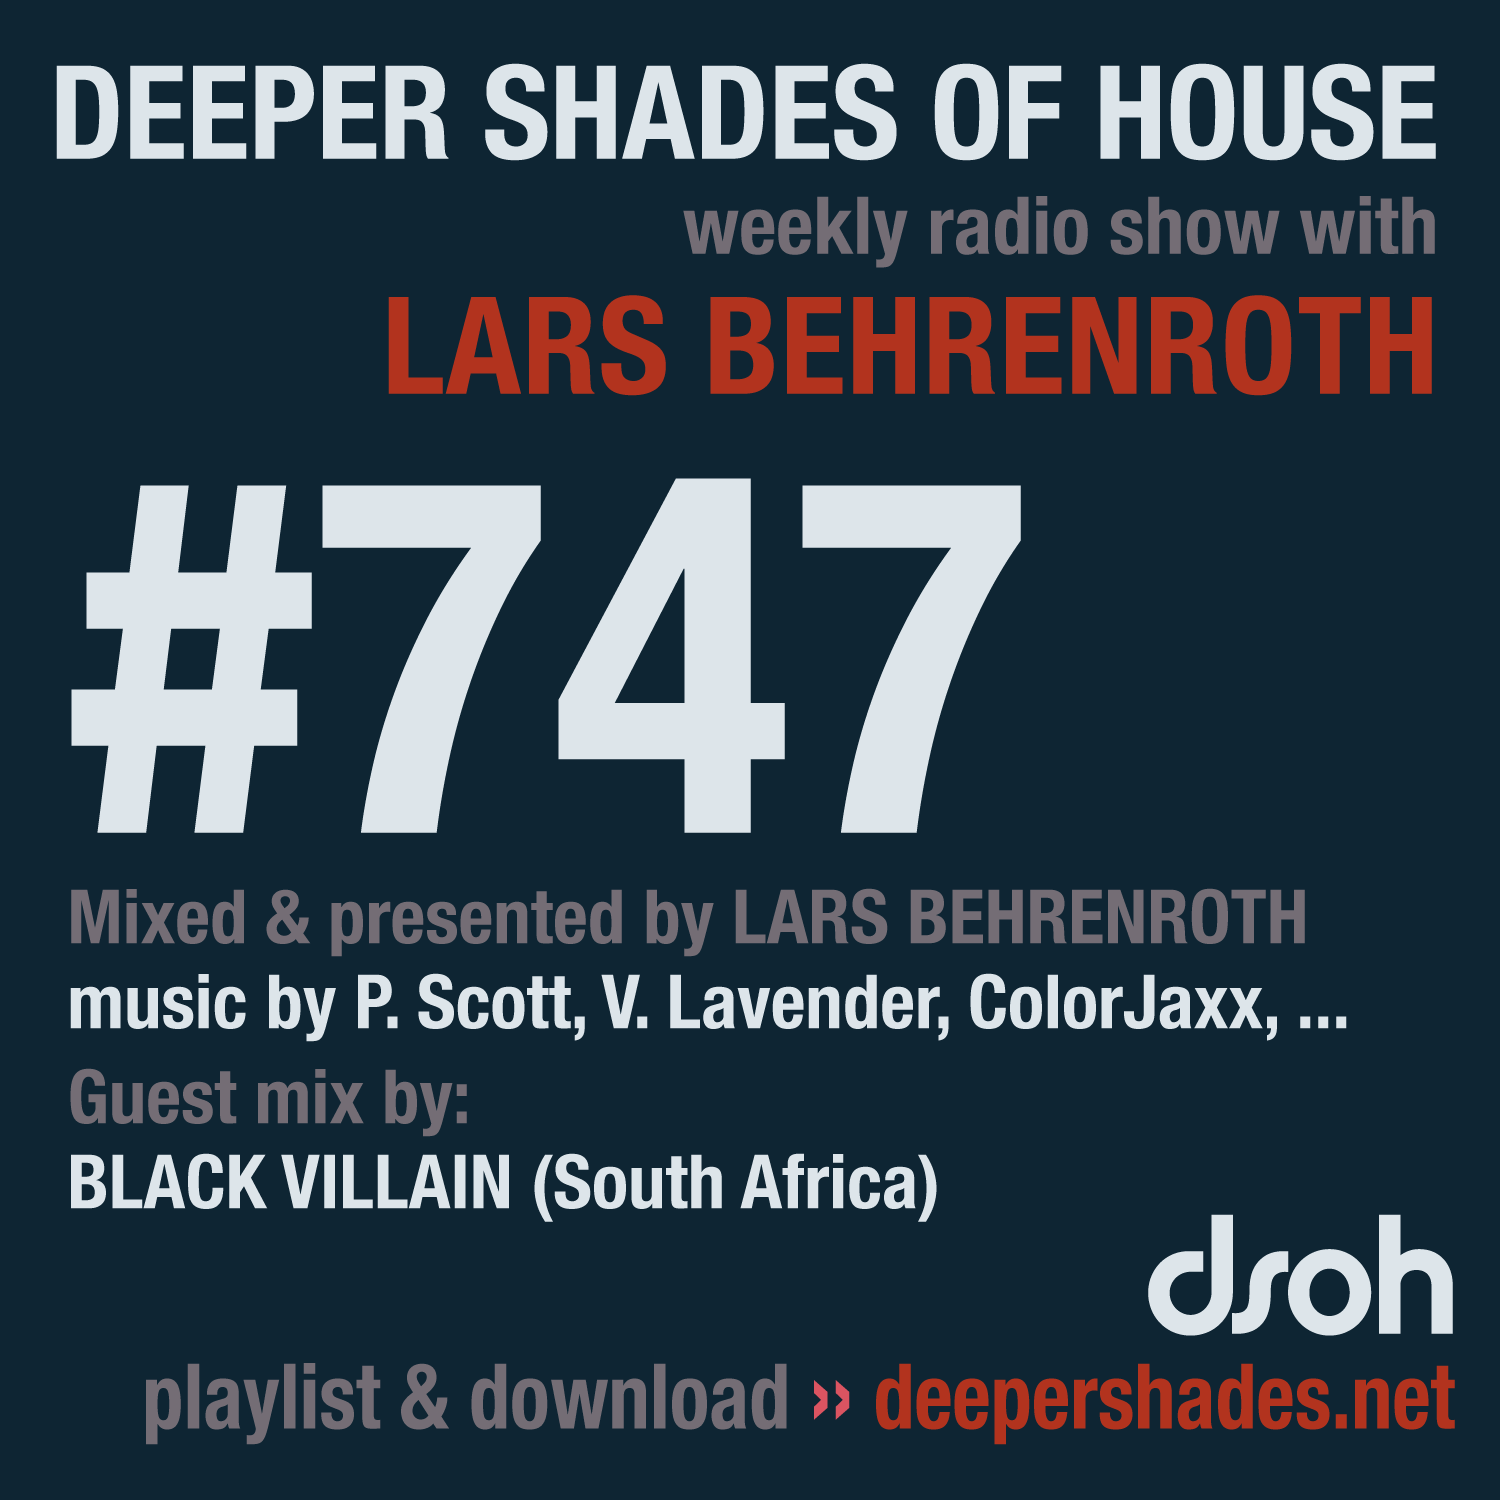 Deeper Shades Of House 747